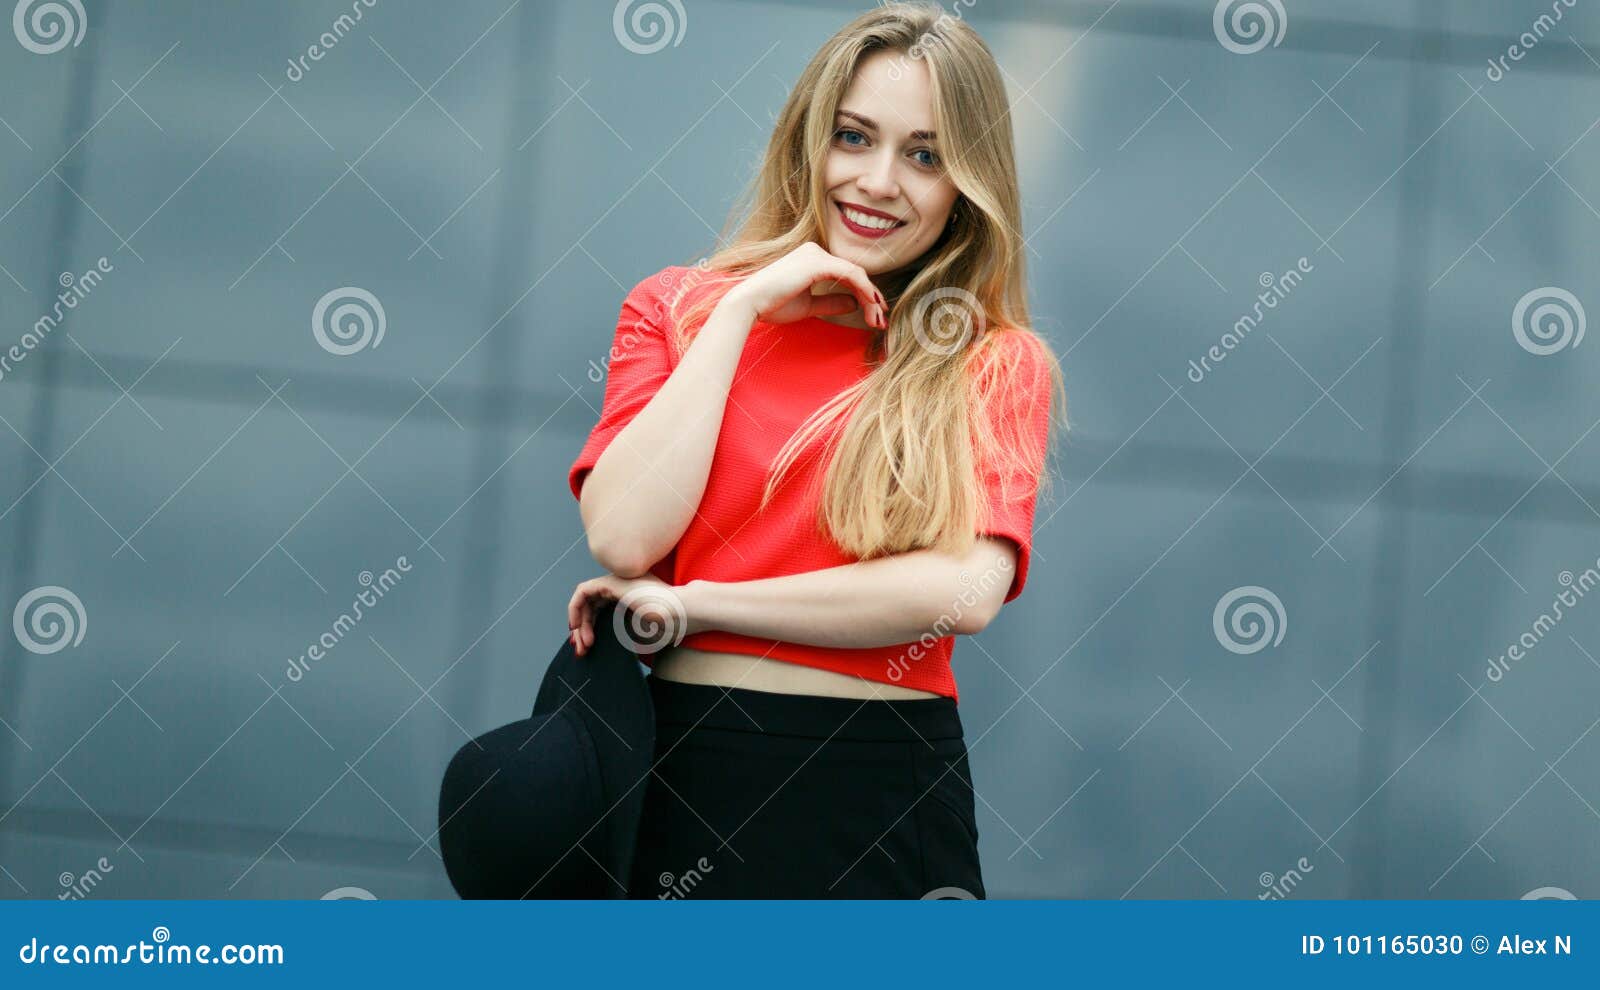 Photo of Smiling Girl in Red Jacket Stock Photo - Image of lovely ...